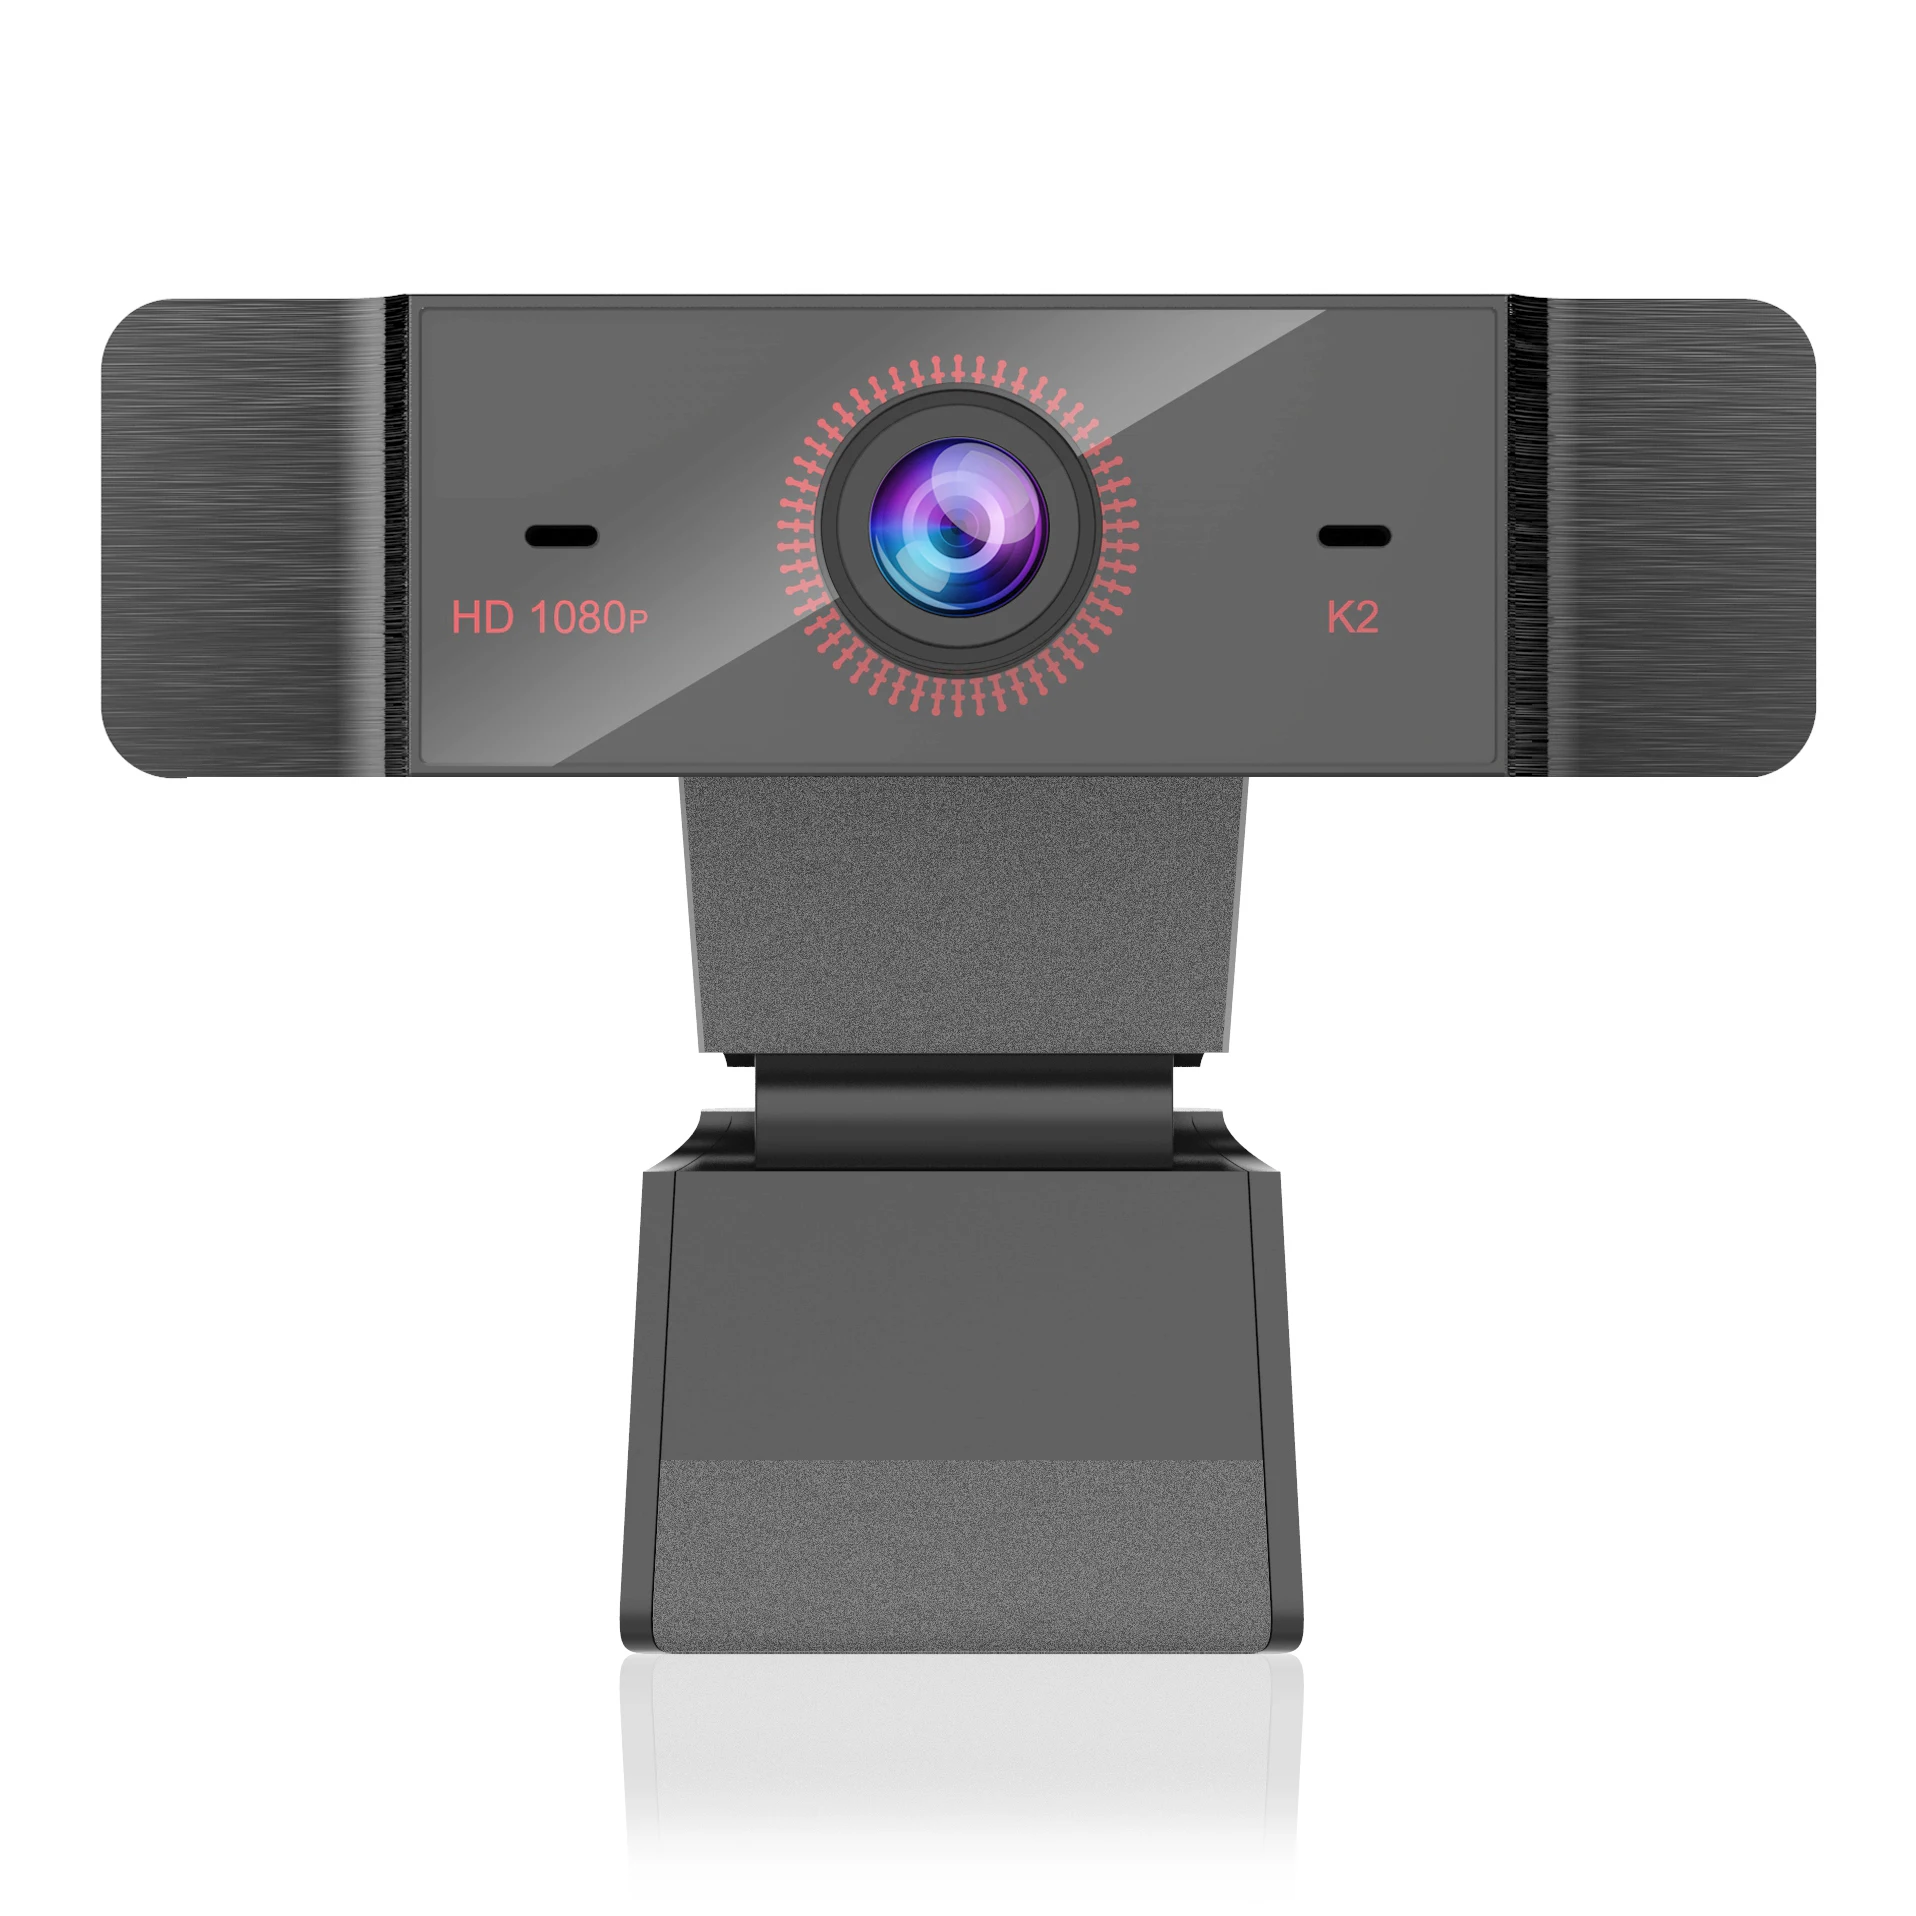 
Factory OEM 1080P Full HD Streaming Webcam for PC, MAC, Desktop & Laptop, Plug and Play USB Camera for YouTube, Skype  (60764248572)